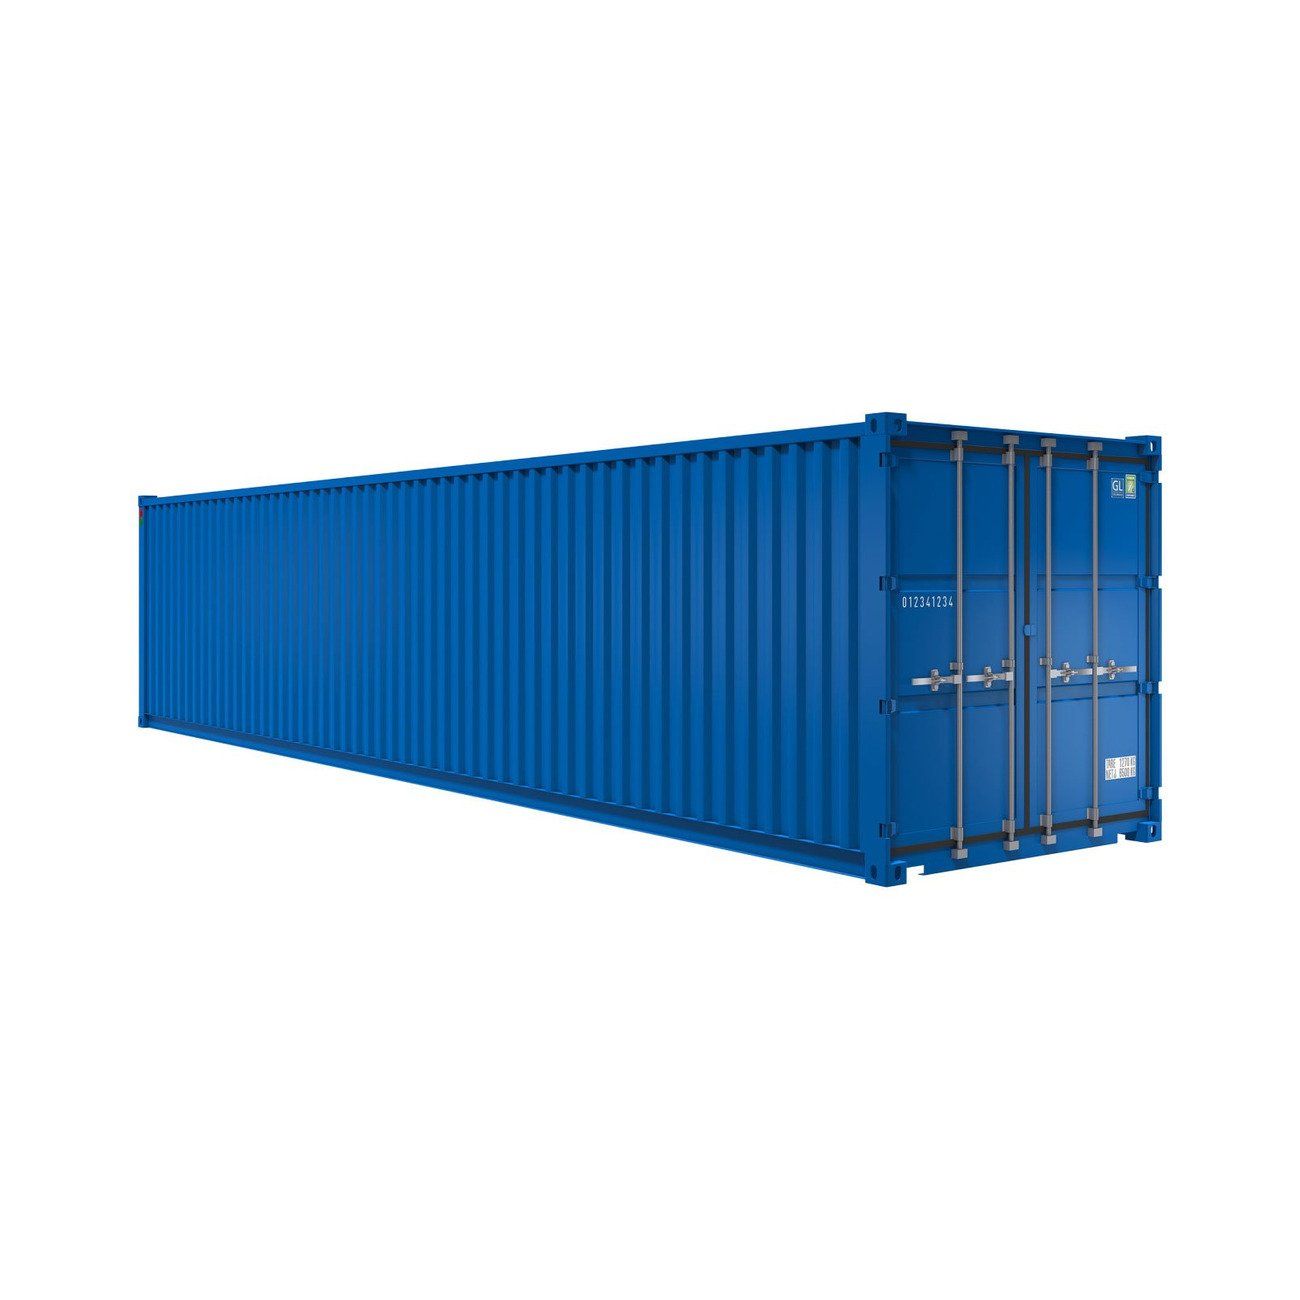 40’ DV CONTAINEX shipping container